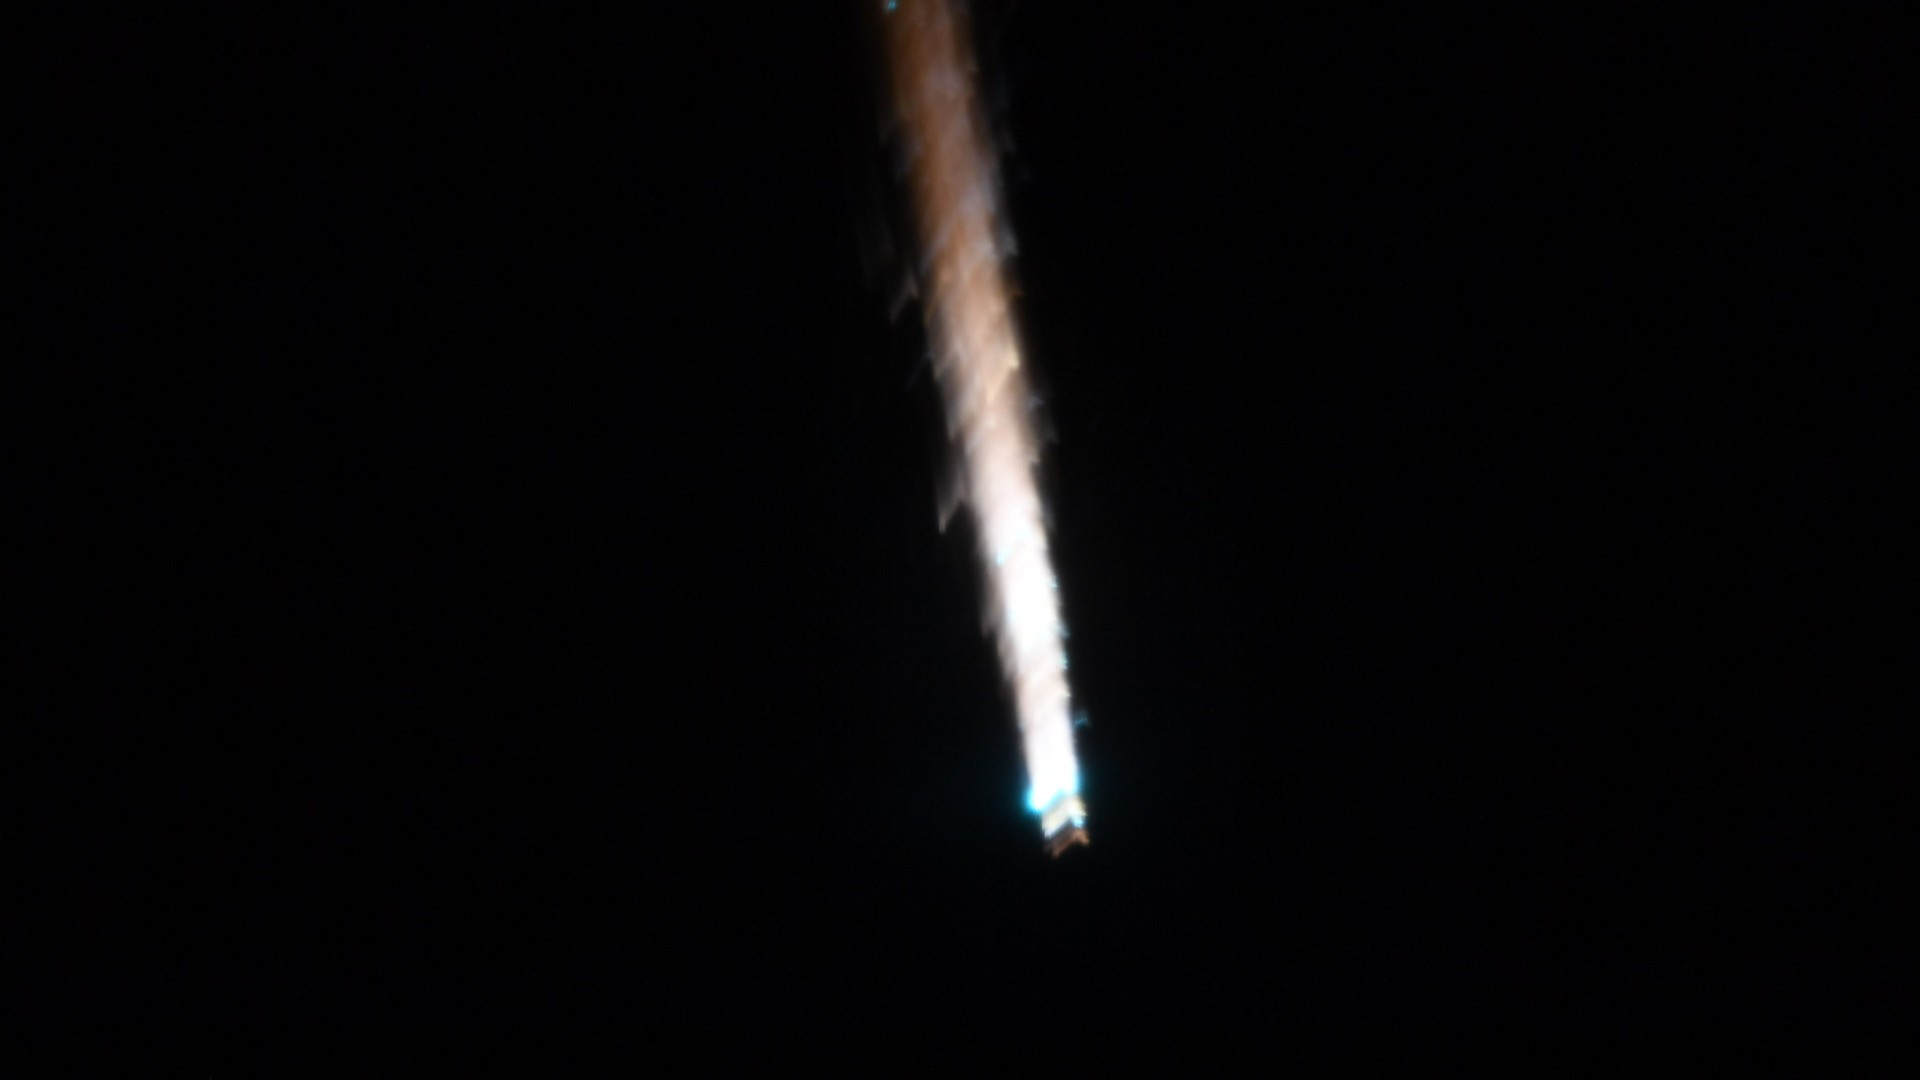 ISS astronauts watch Russian cargo ship burn up in Earth’s atmosphere (photos) Space